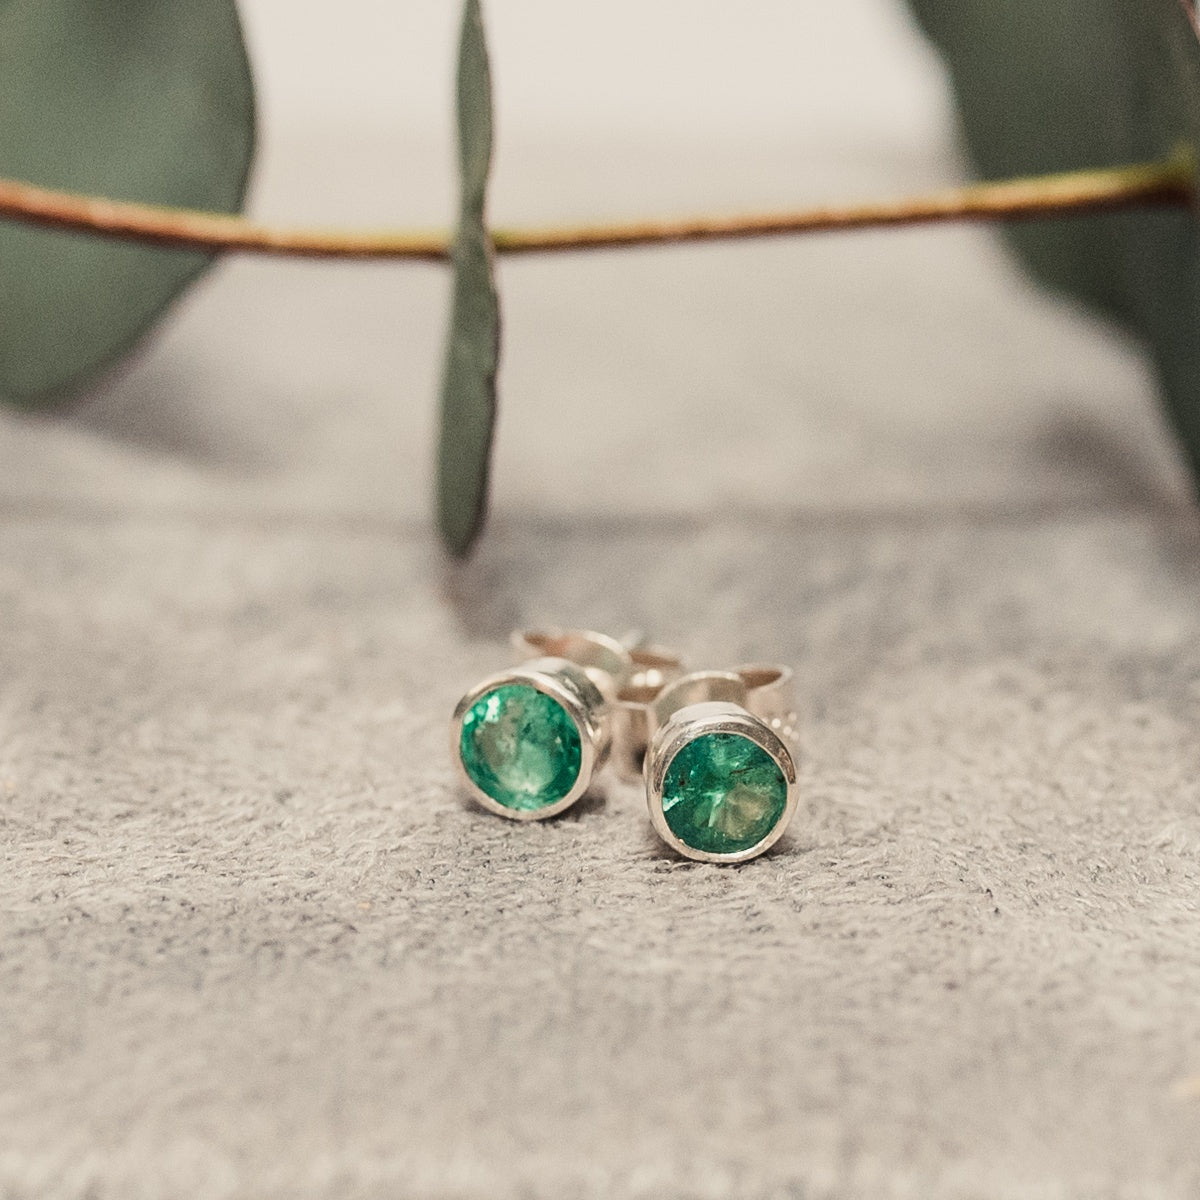 Emerald and Silver Stud Earrings